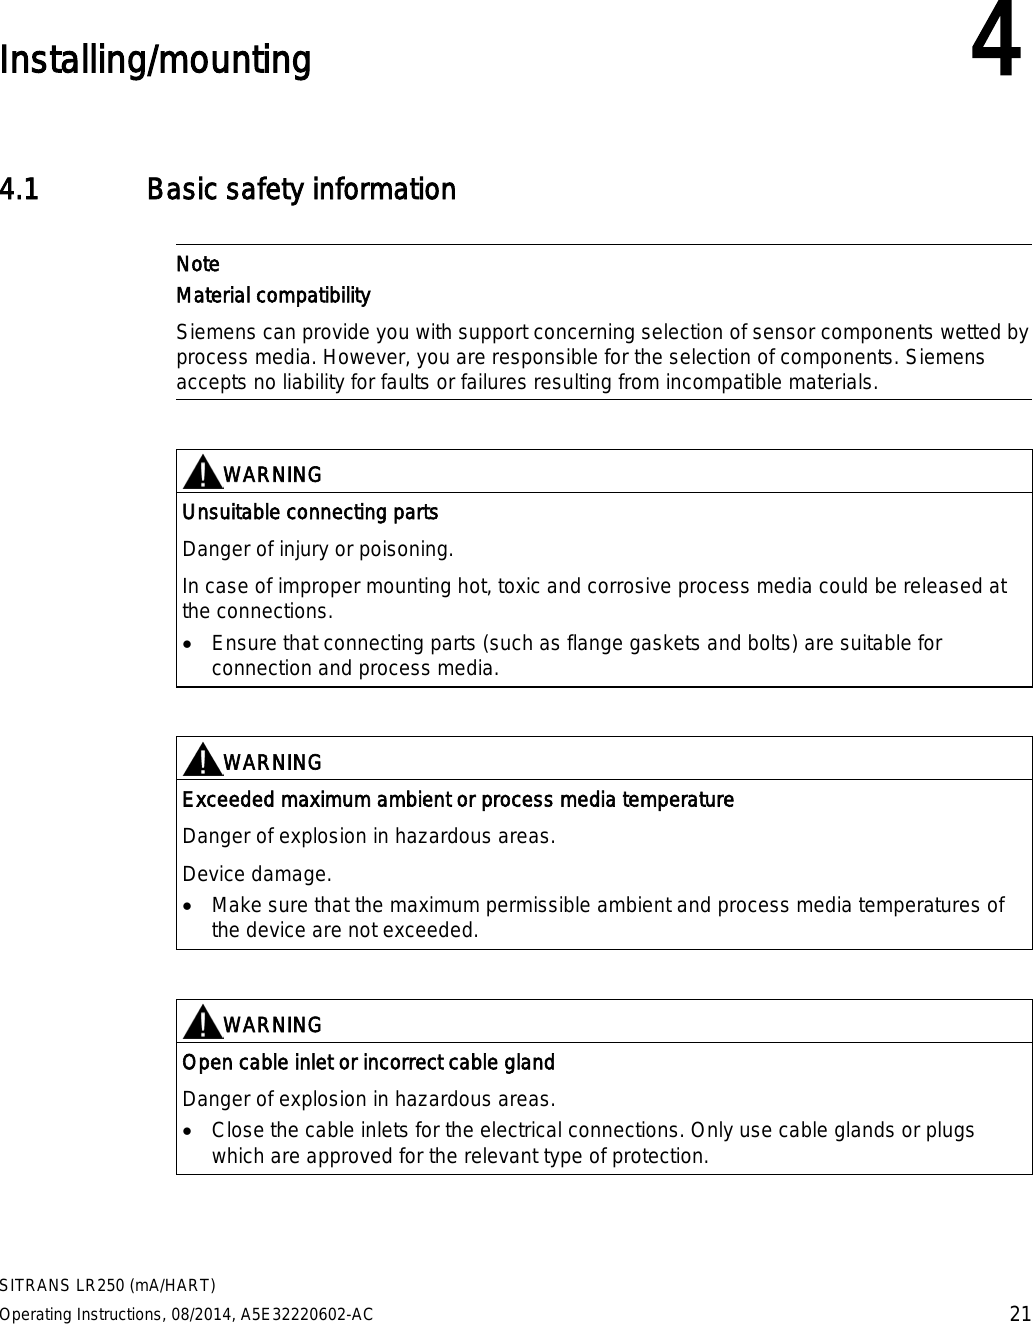  SITRANS LR250 (mA/HART) Operating Instructions, 08/2014, A5E32220602-AC 21  Installing/mounting 4 4.1 Basic safety information   Note Material compatibility Siemens can provide you with support concerning selection of sensor components wetted by process media. However, you are responsible for the selection of components. Siemens accepts no liability for faults or failures resulting from incompatible materials.    WARNING Unsuitable connecting parts Danger of injury or poisoning.  In case of improper mounting hot, toxic and corrosive process media could be released at the connections. • Ensure that connecting parts (such as flange gaskets and bolts) are suitable for connection and process media.    WARNING Exceeded maximum ambient or process media temperature Danger of explosion in hazardous areas. Device damage. • Make sure that the maximum permissible ambient and process media temperatures of the device are not exceeded.    WARNING Open cable inlet or incorrect cable gland Danger of explosion in hazardous areas. • Close the cable inlets for the electrical connections. Only use cable glands or plugs which are approved for the relevant type of protection.  